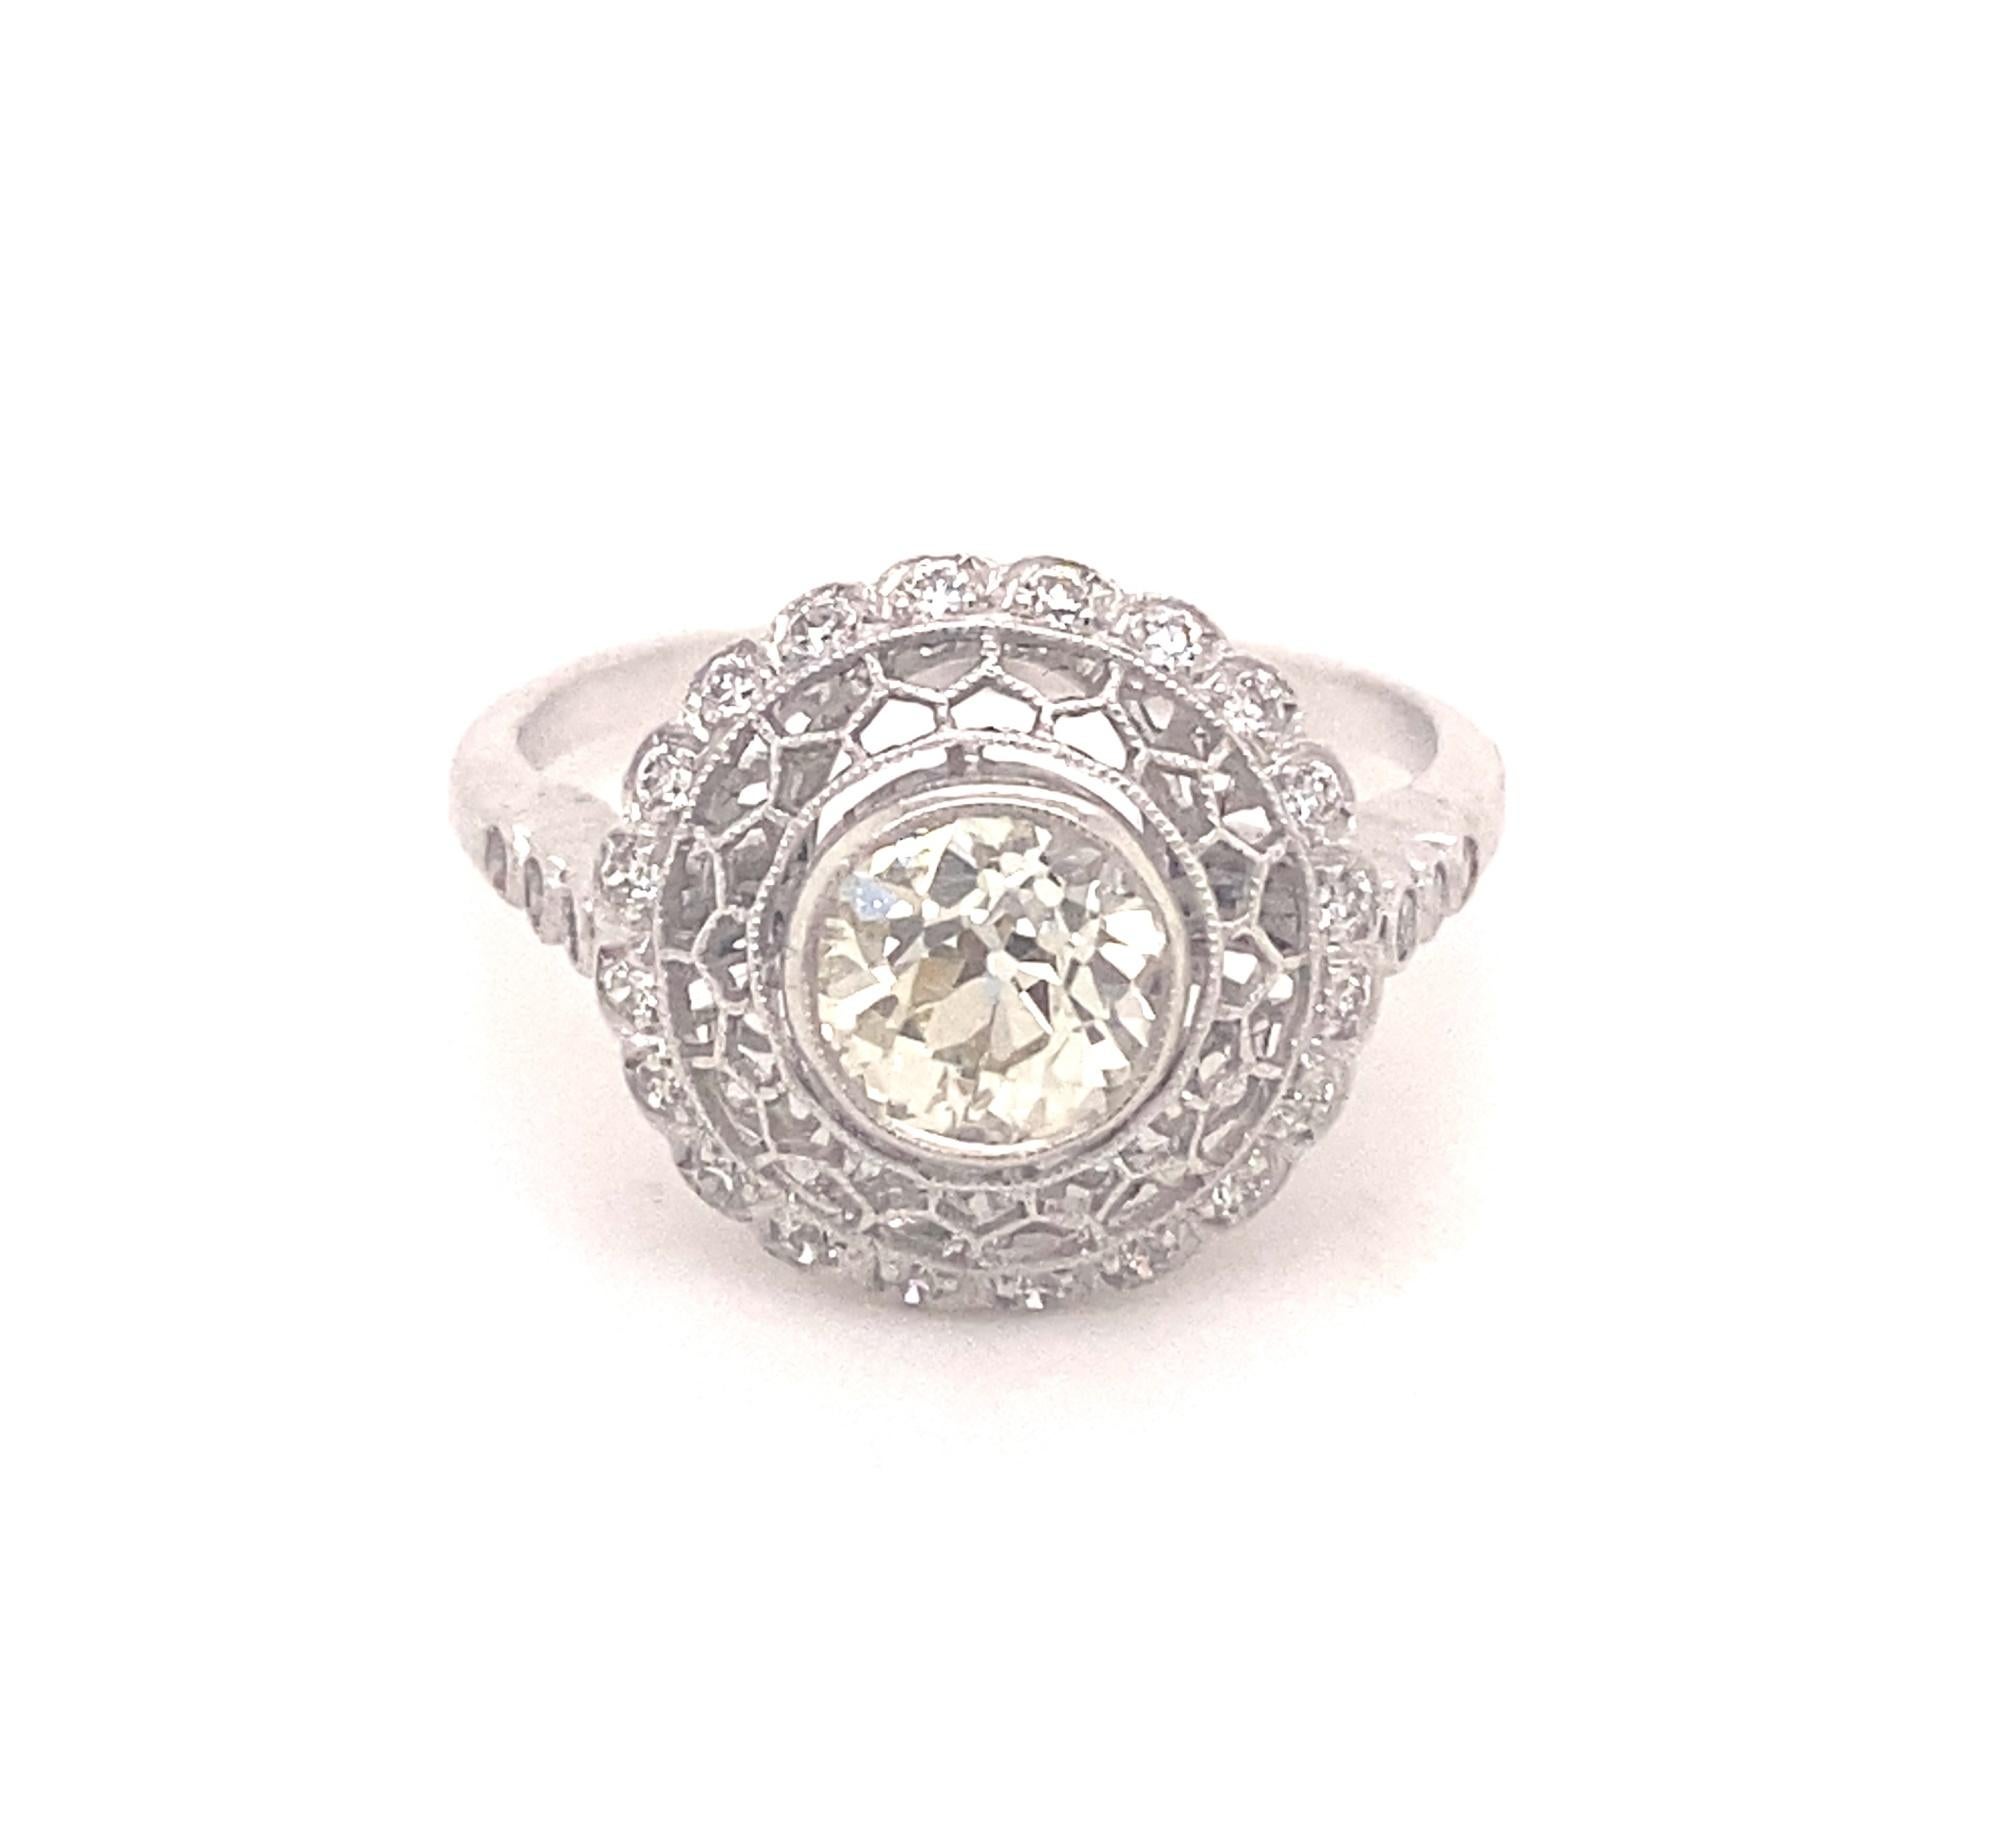 This is a beautiful vintage filigree .87 carat diamond engagement set in platinum. The center diamond is J color VS-2 clarity eye clean bright and fiery.  Around the center diamond is a halo of 20 diamonds I color VS-2 clarity. On each shoulder of